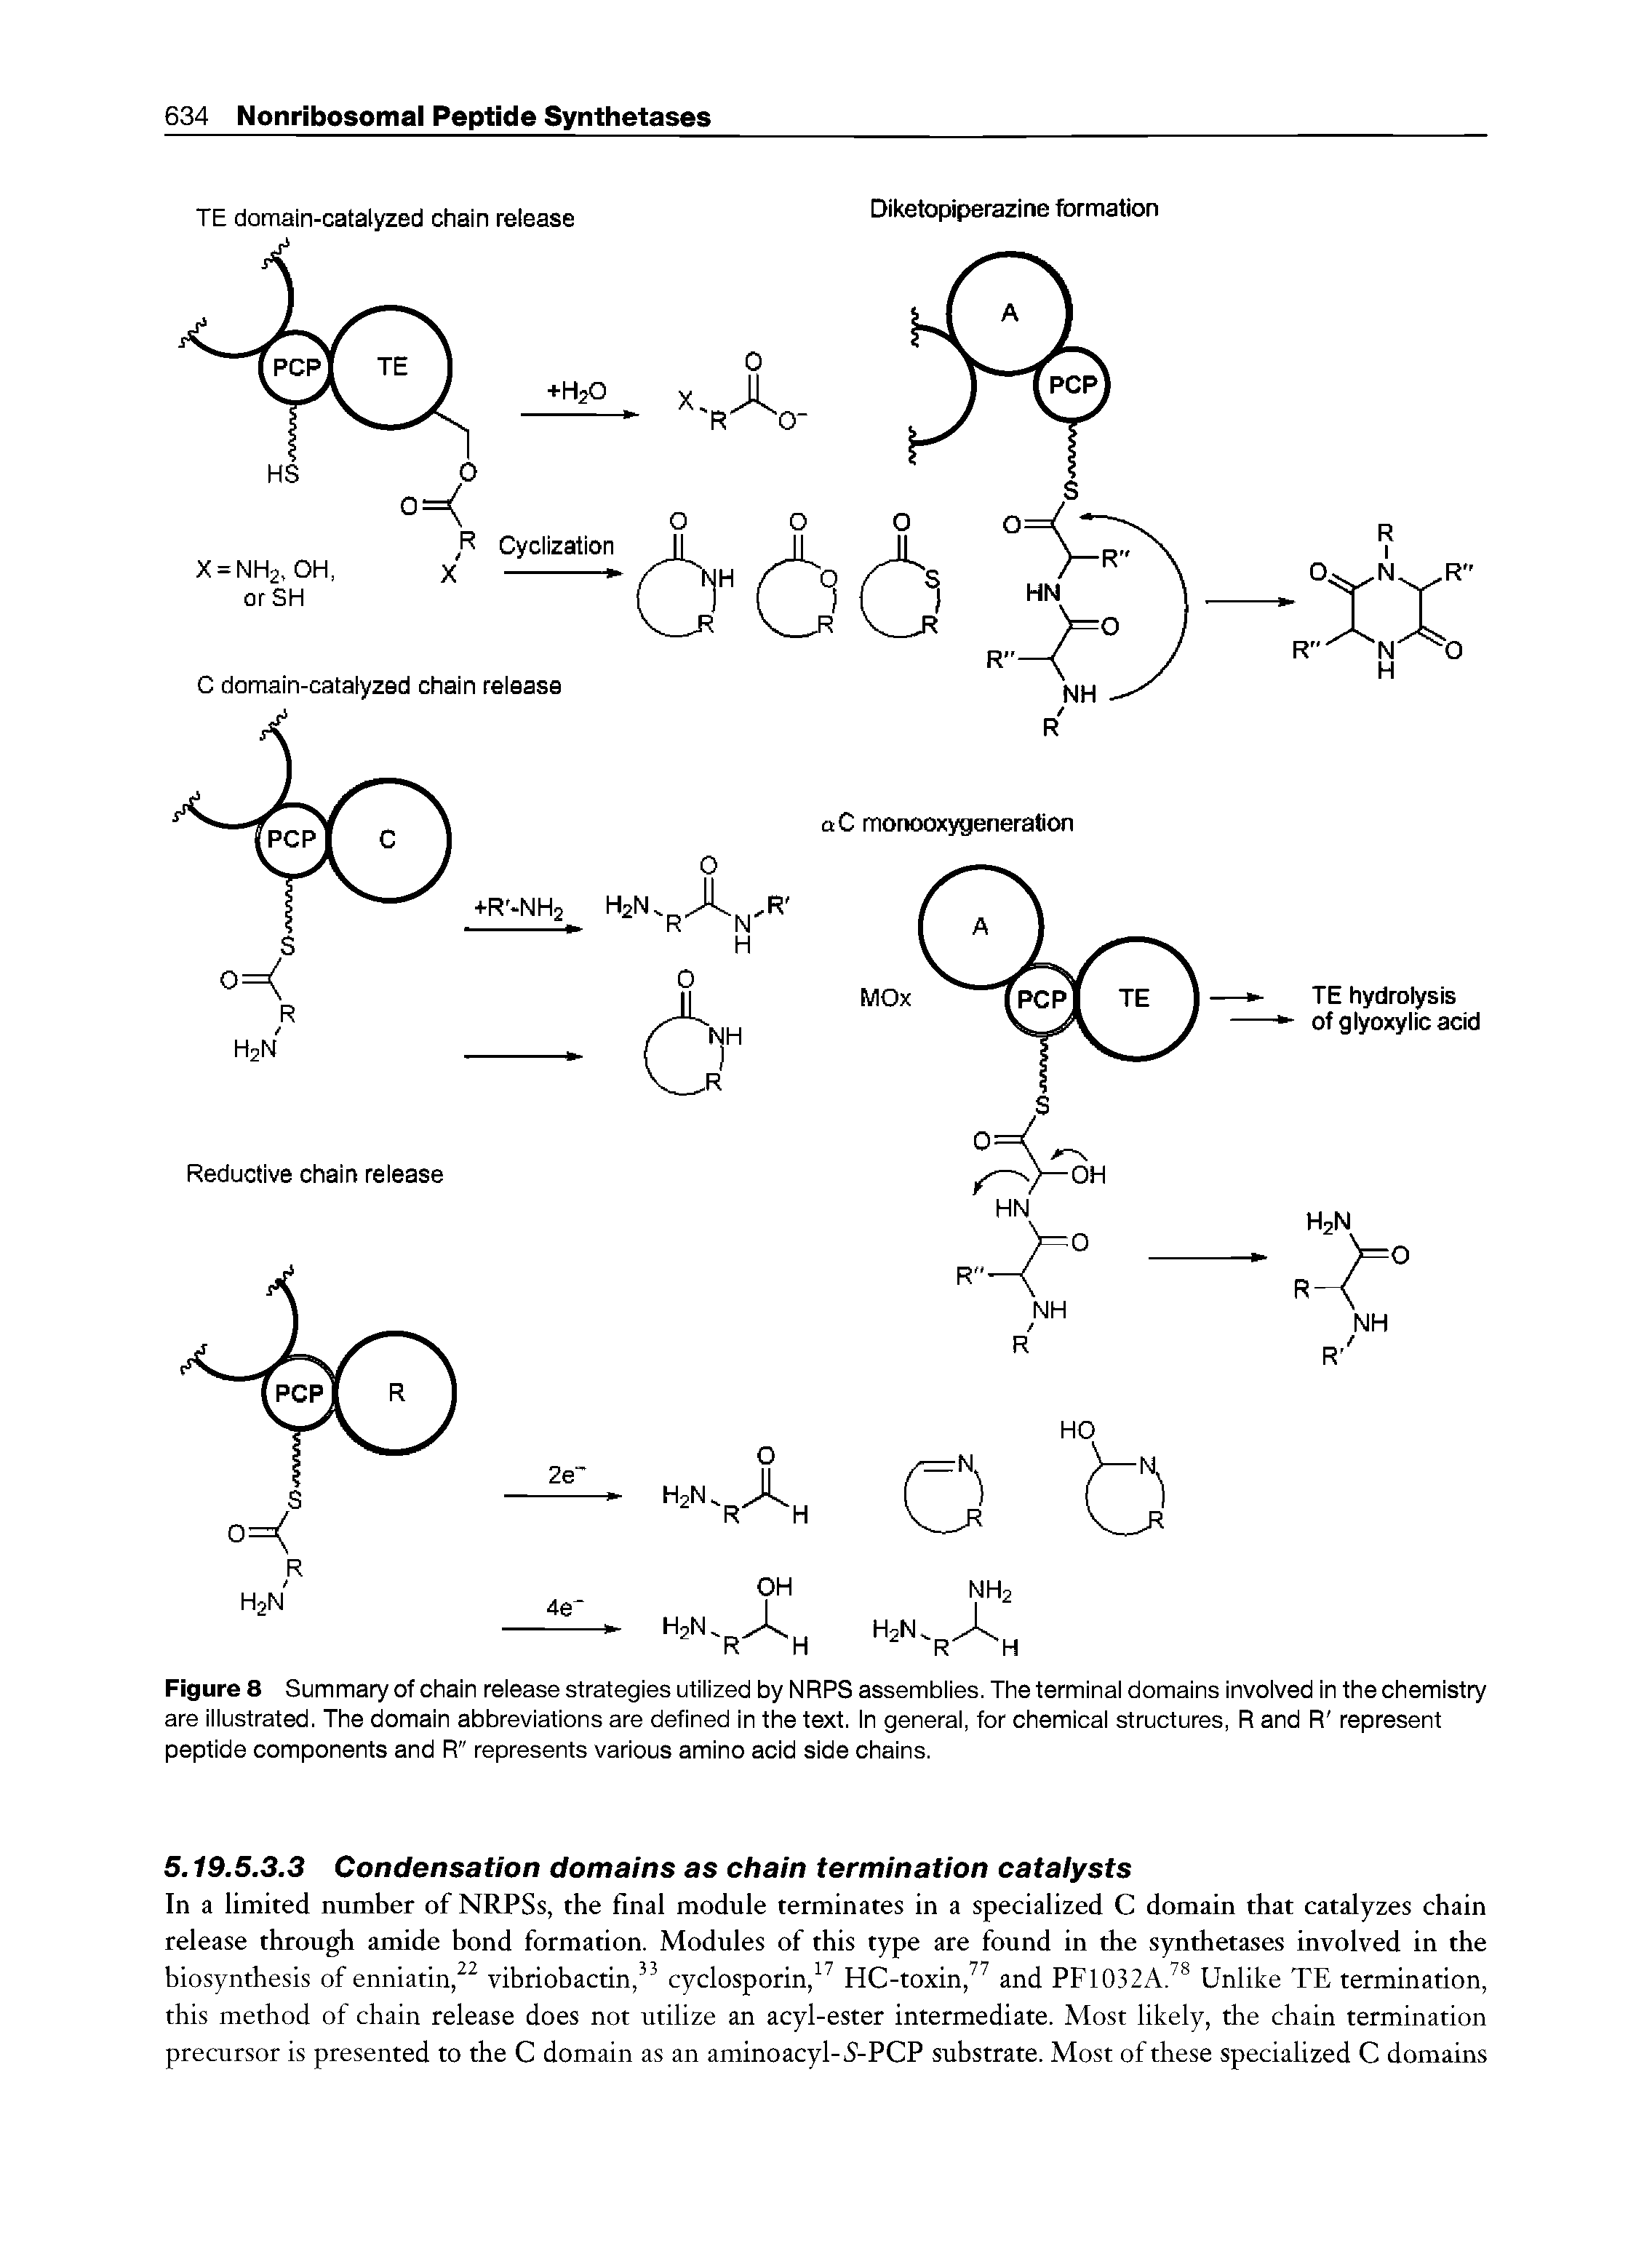 Figure 8 Summary of chain release strategies utilized by NRPS assemblies. The terminal domains involved in the chemistry are illustrated. The domain abbreviations are defined in the text, in general, for chemical structures, R and R represent peptide components and R" represents various amino acid side chains.